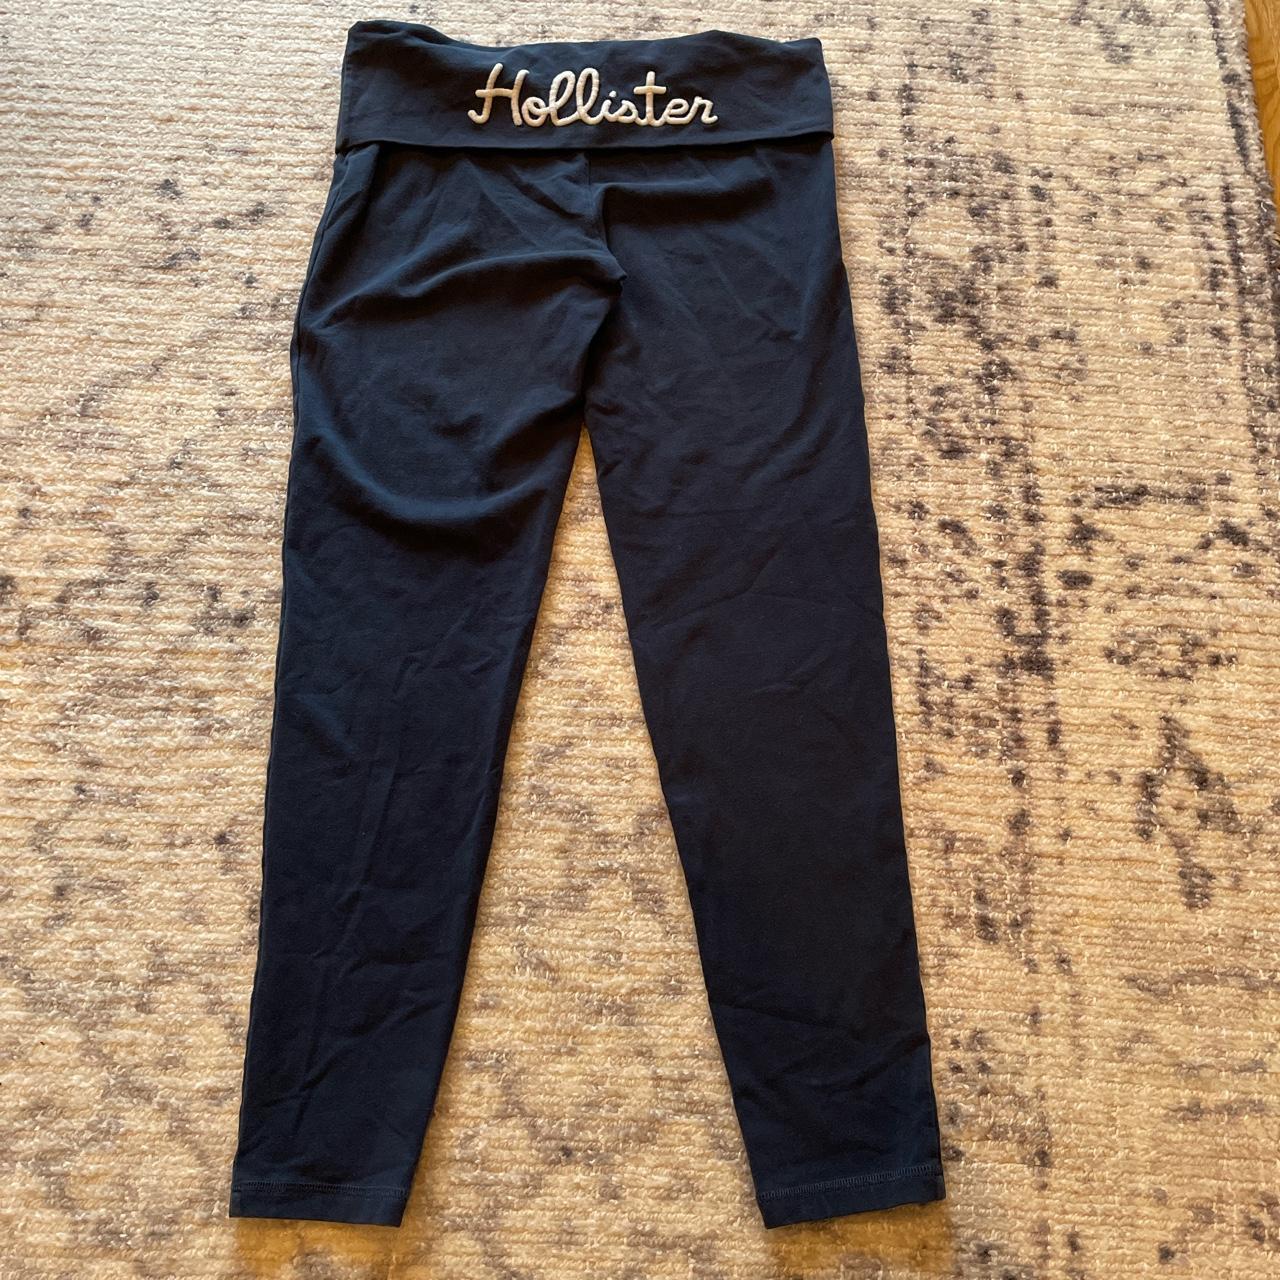 Hollister leggings. Blue with embroidered Hollister